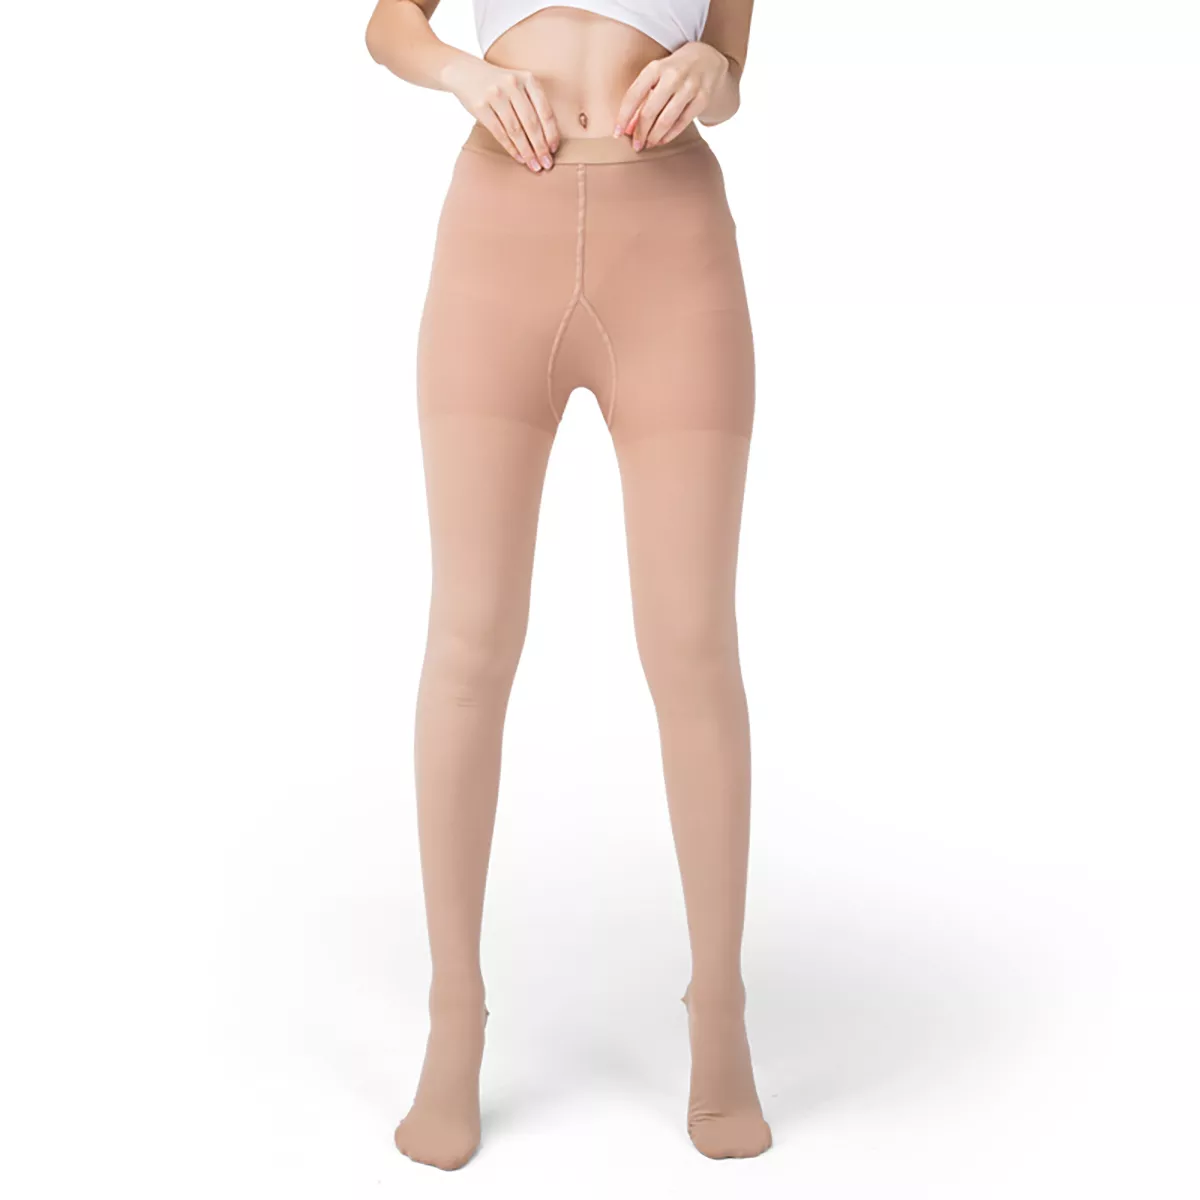 Medical Compression Pantyhose for Women 30-40 MmHg Compression